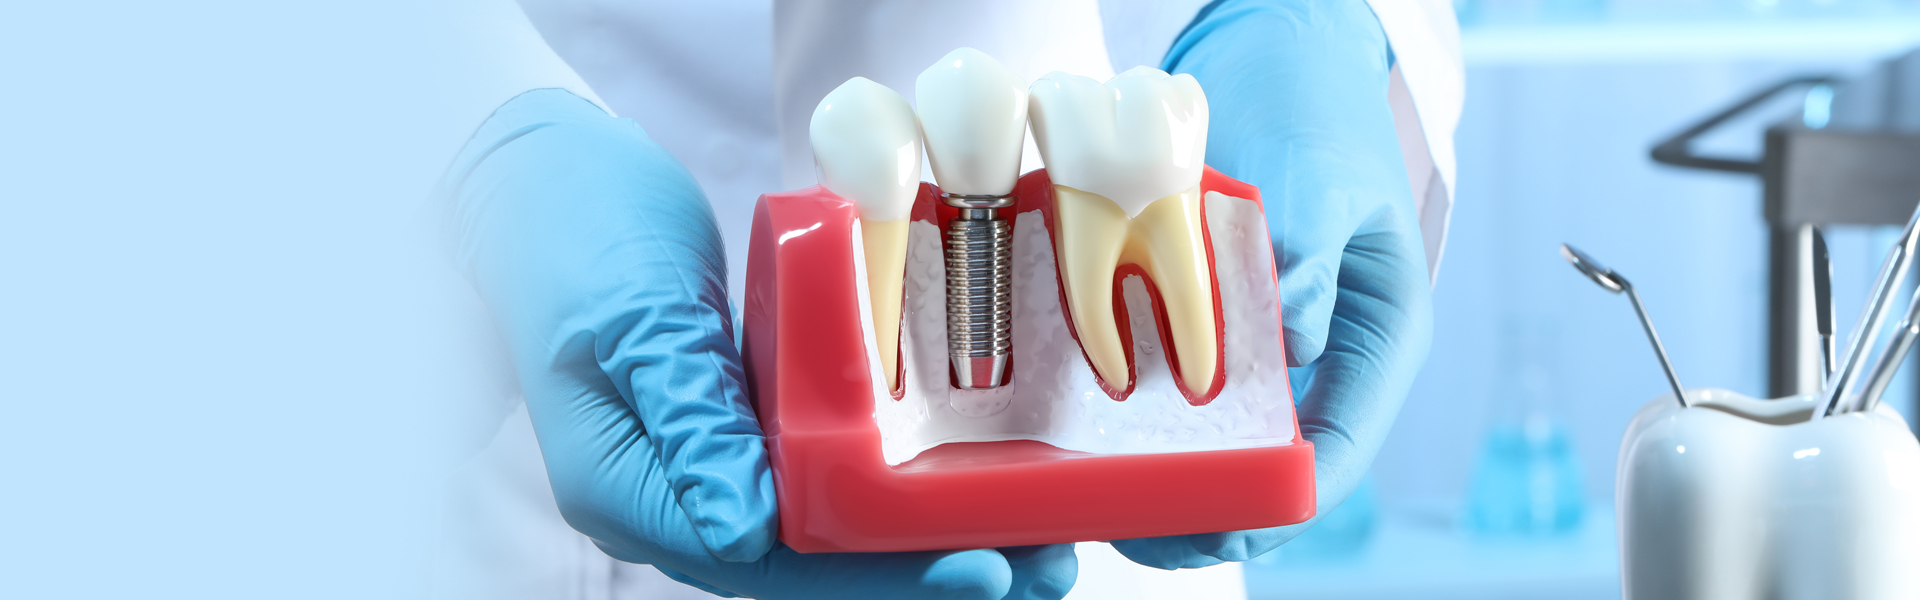 Learn How Dental Implants Can Change Your Life from the Pros